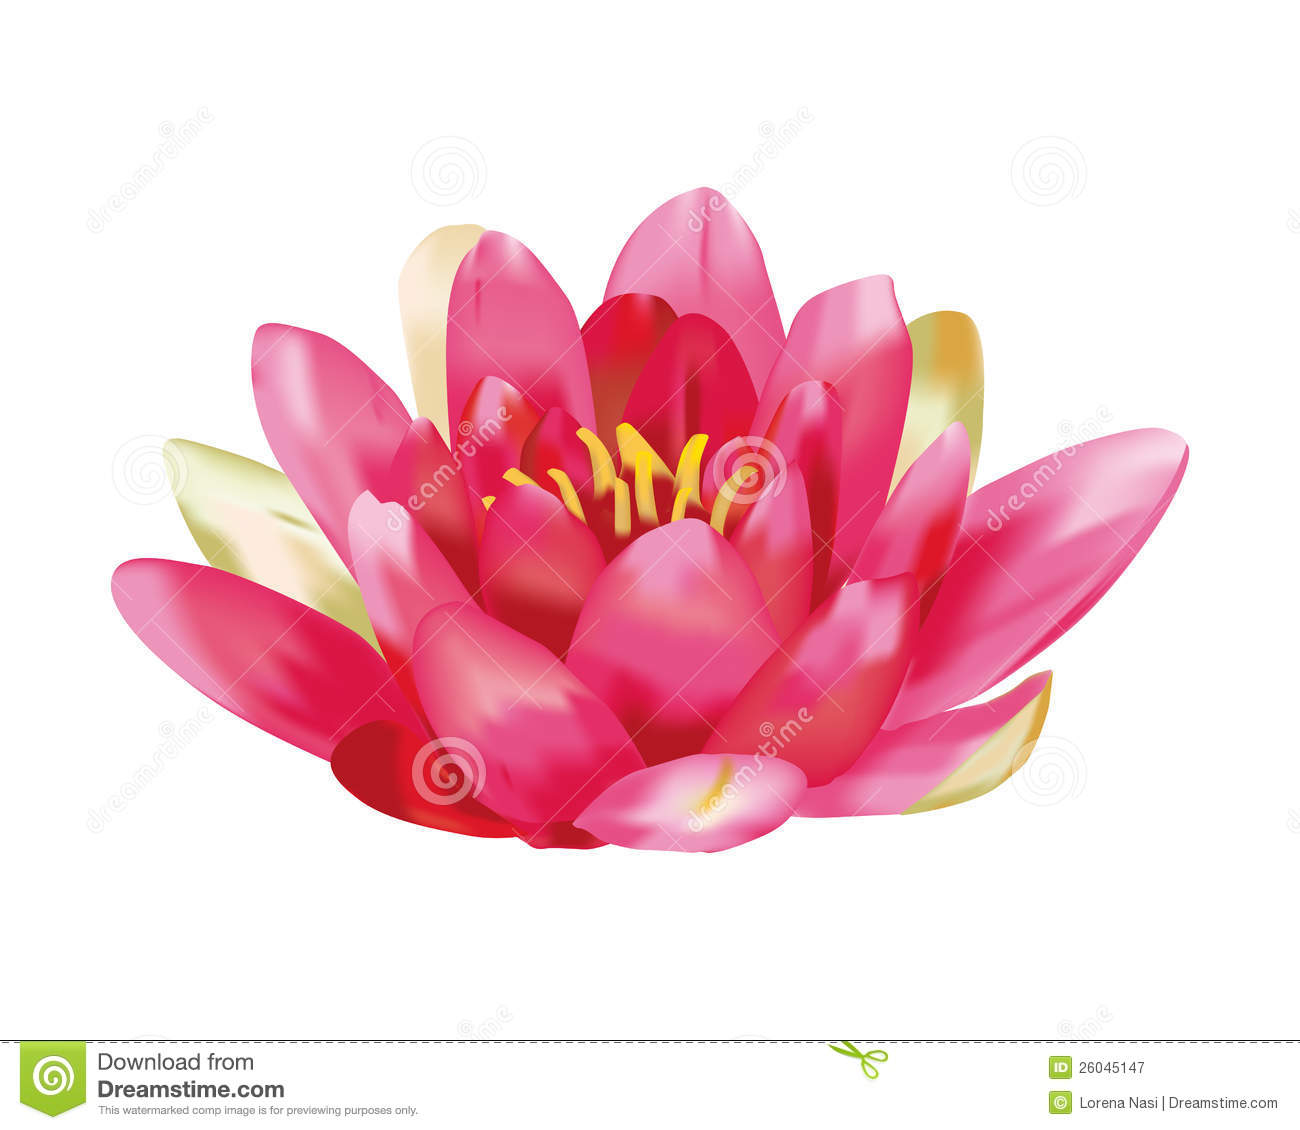 Water Lily Images Free.